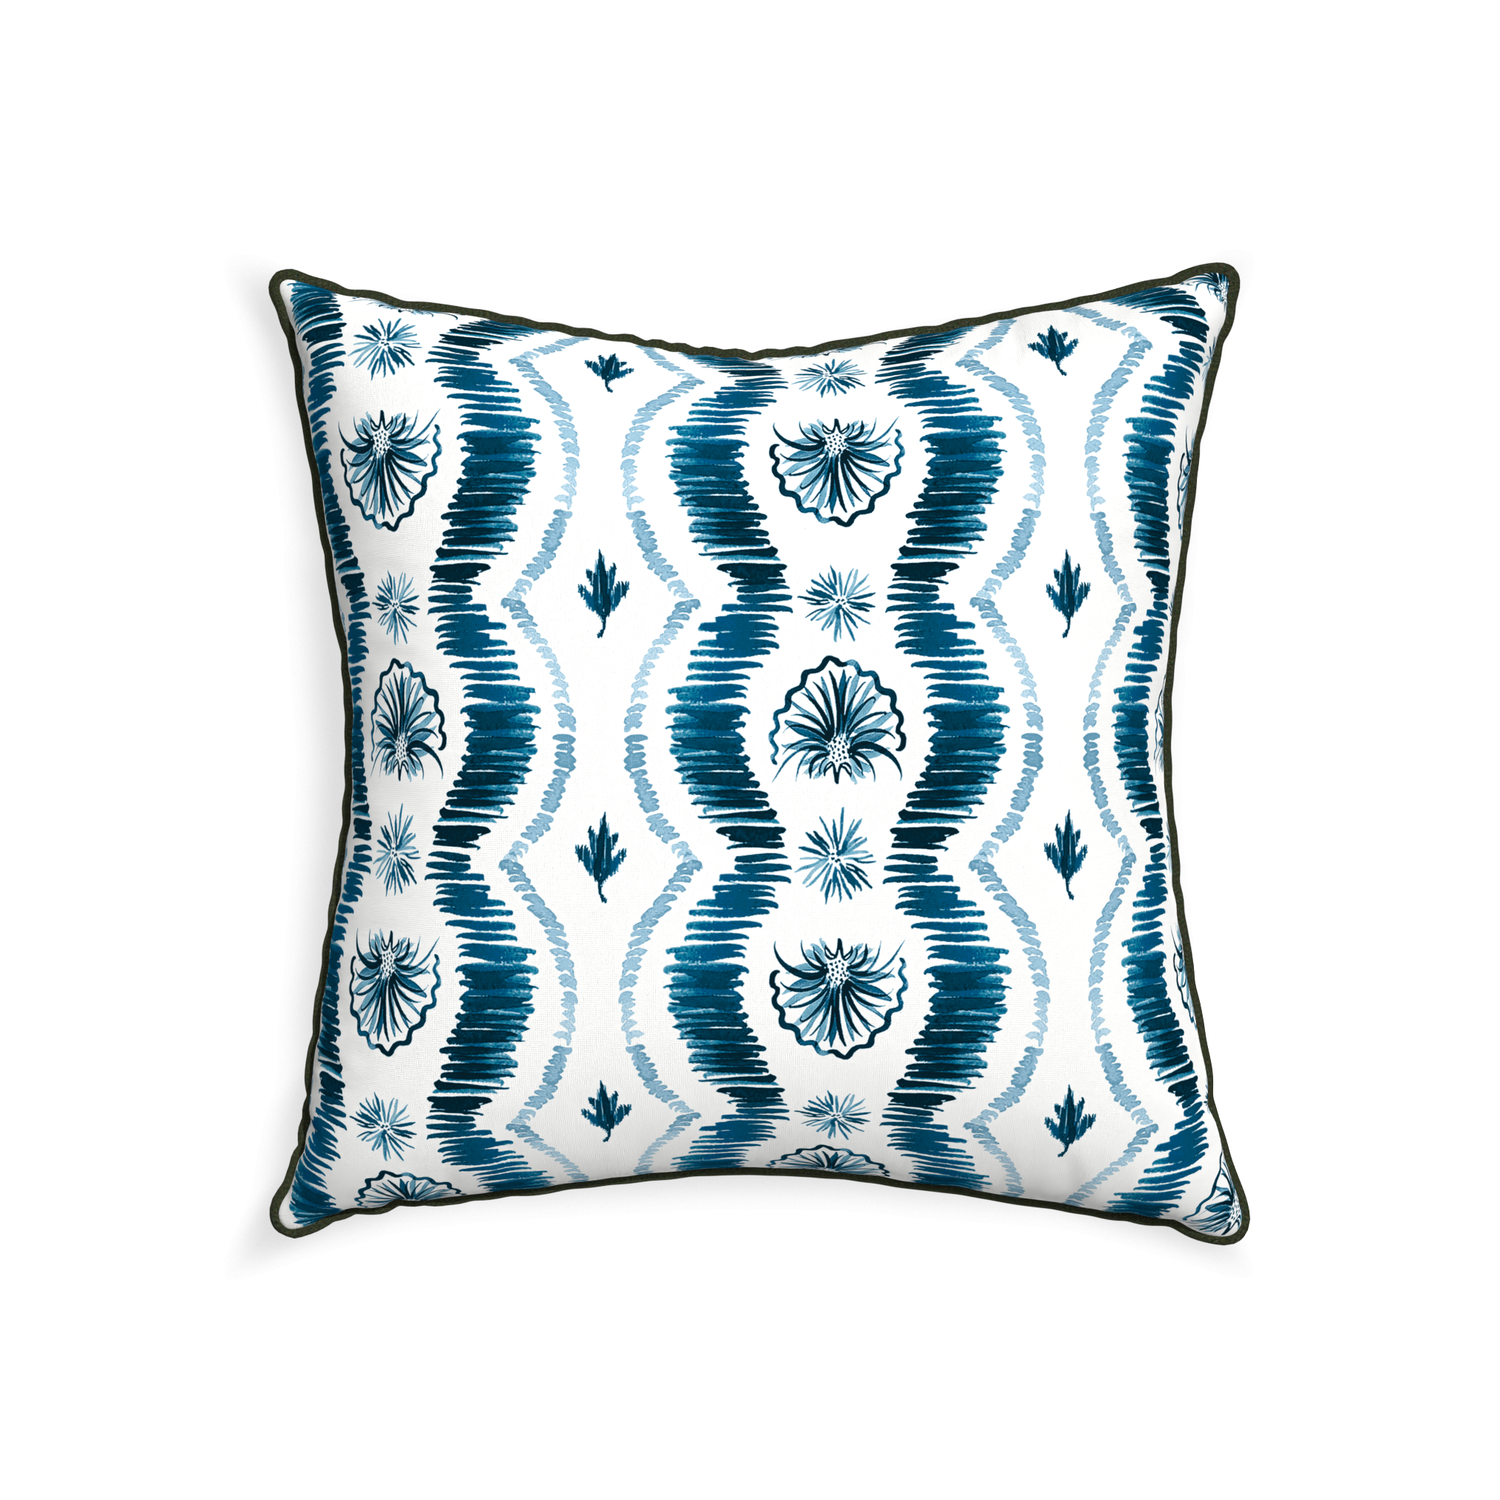 22-square alice custom blue ikatpillow with f piping on white background